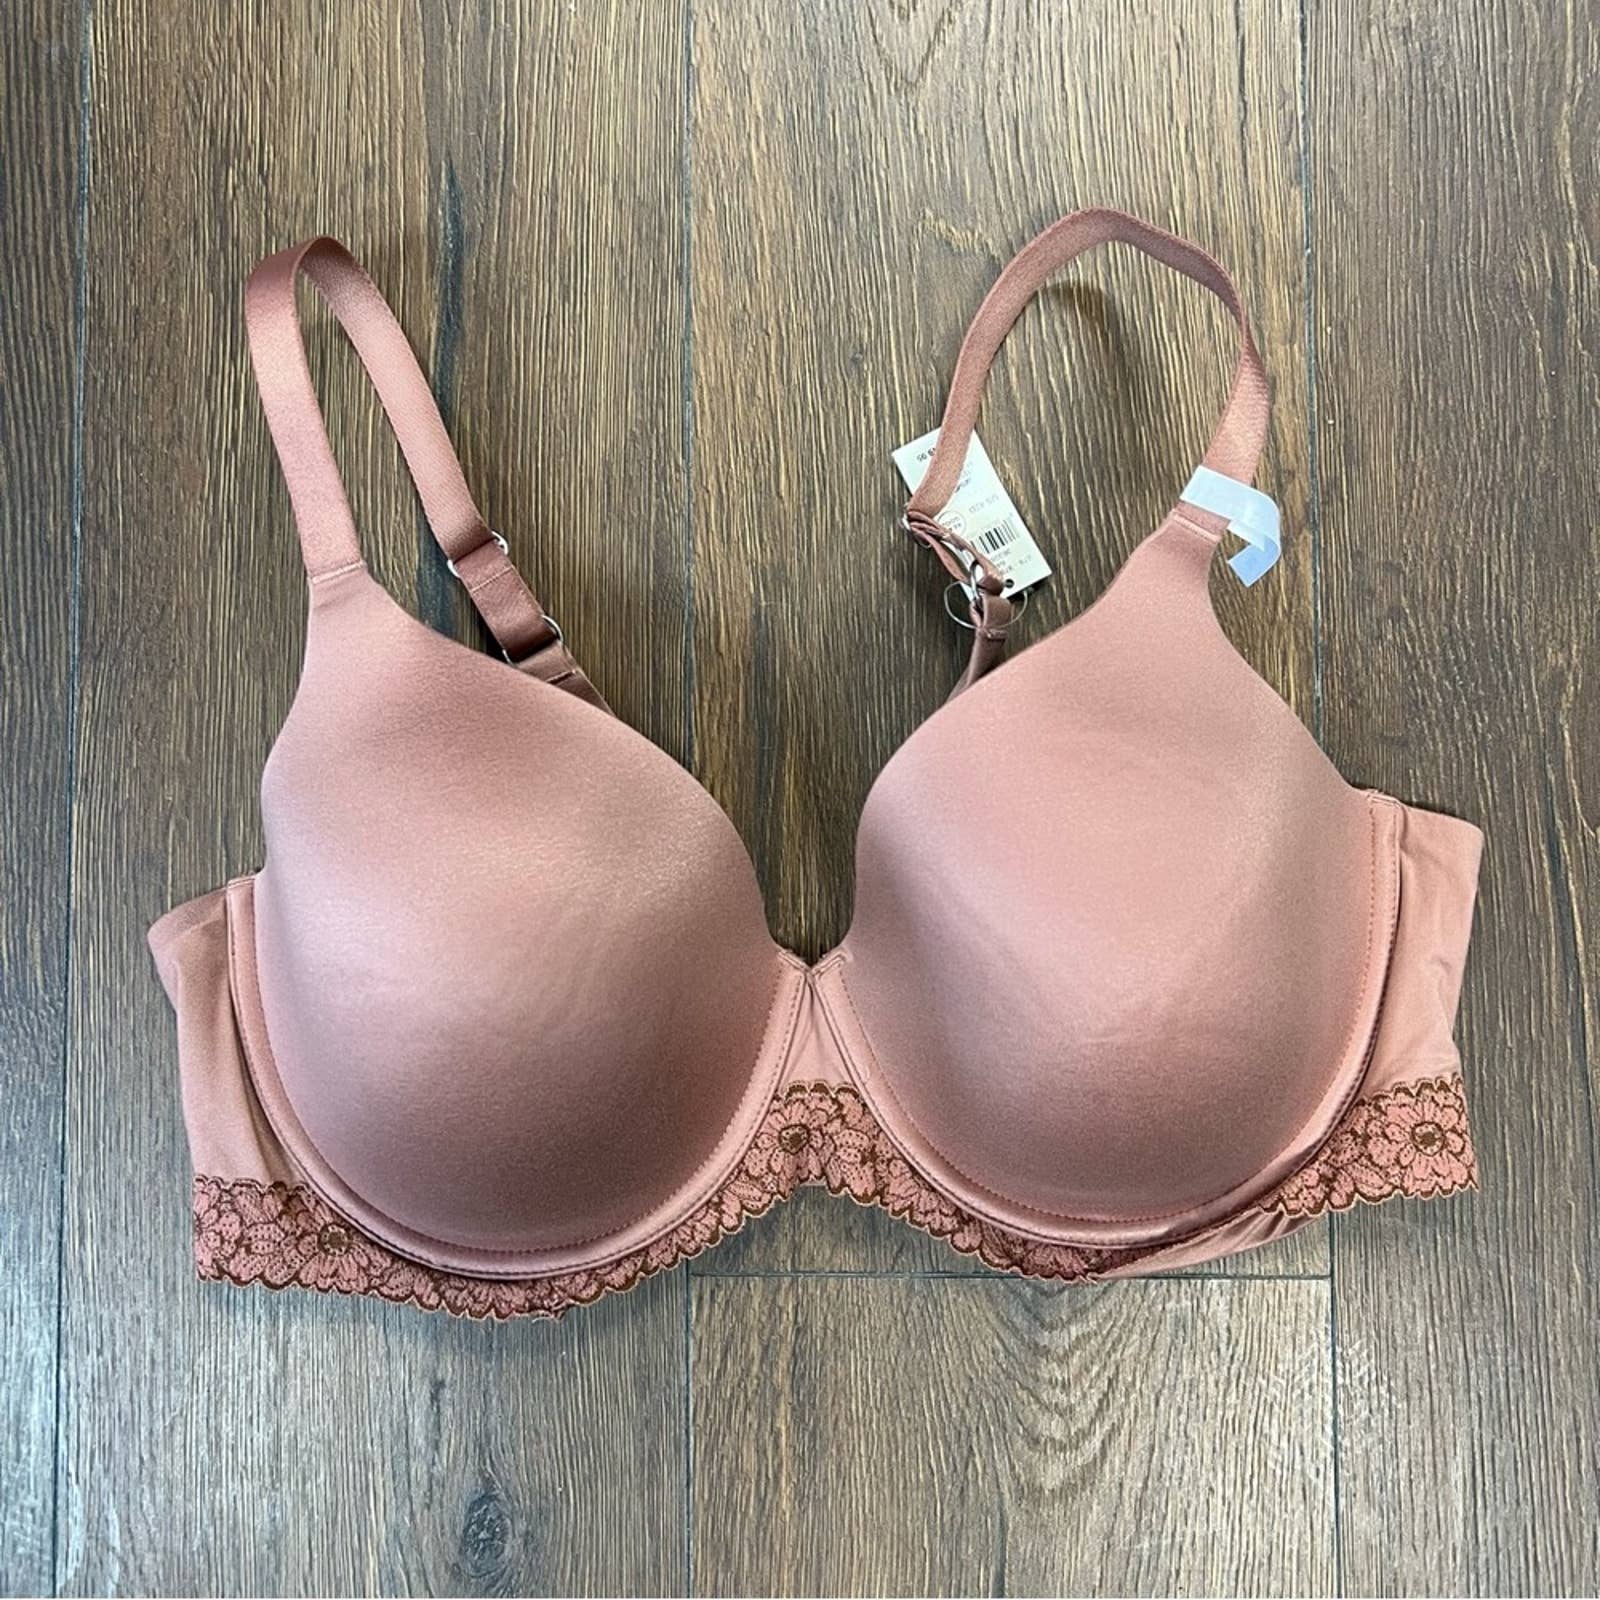 Aerie Women's Real Sunnie Full Coverage Lightly Lined Bra